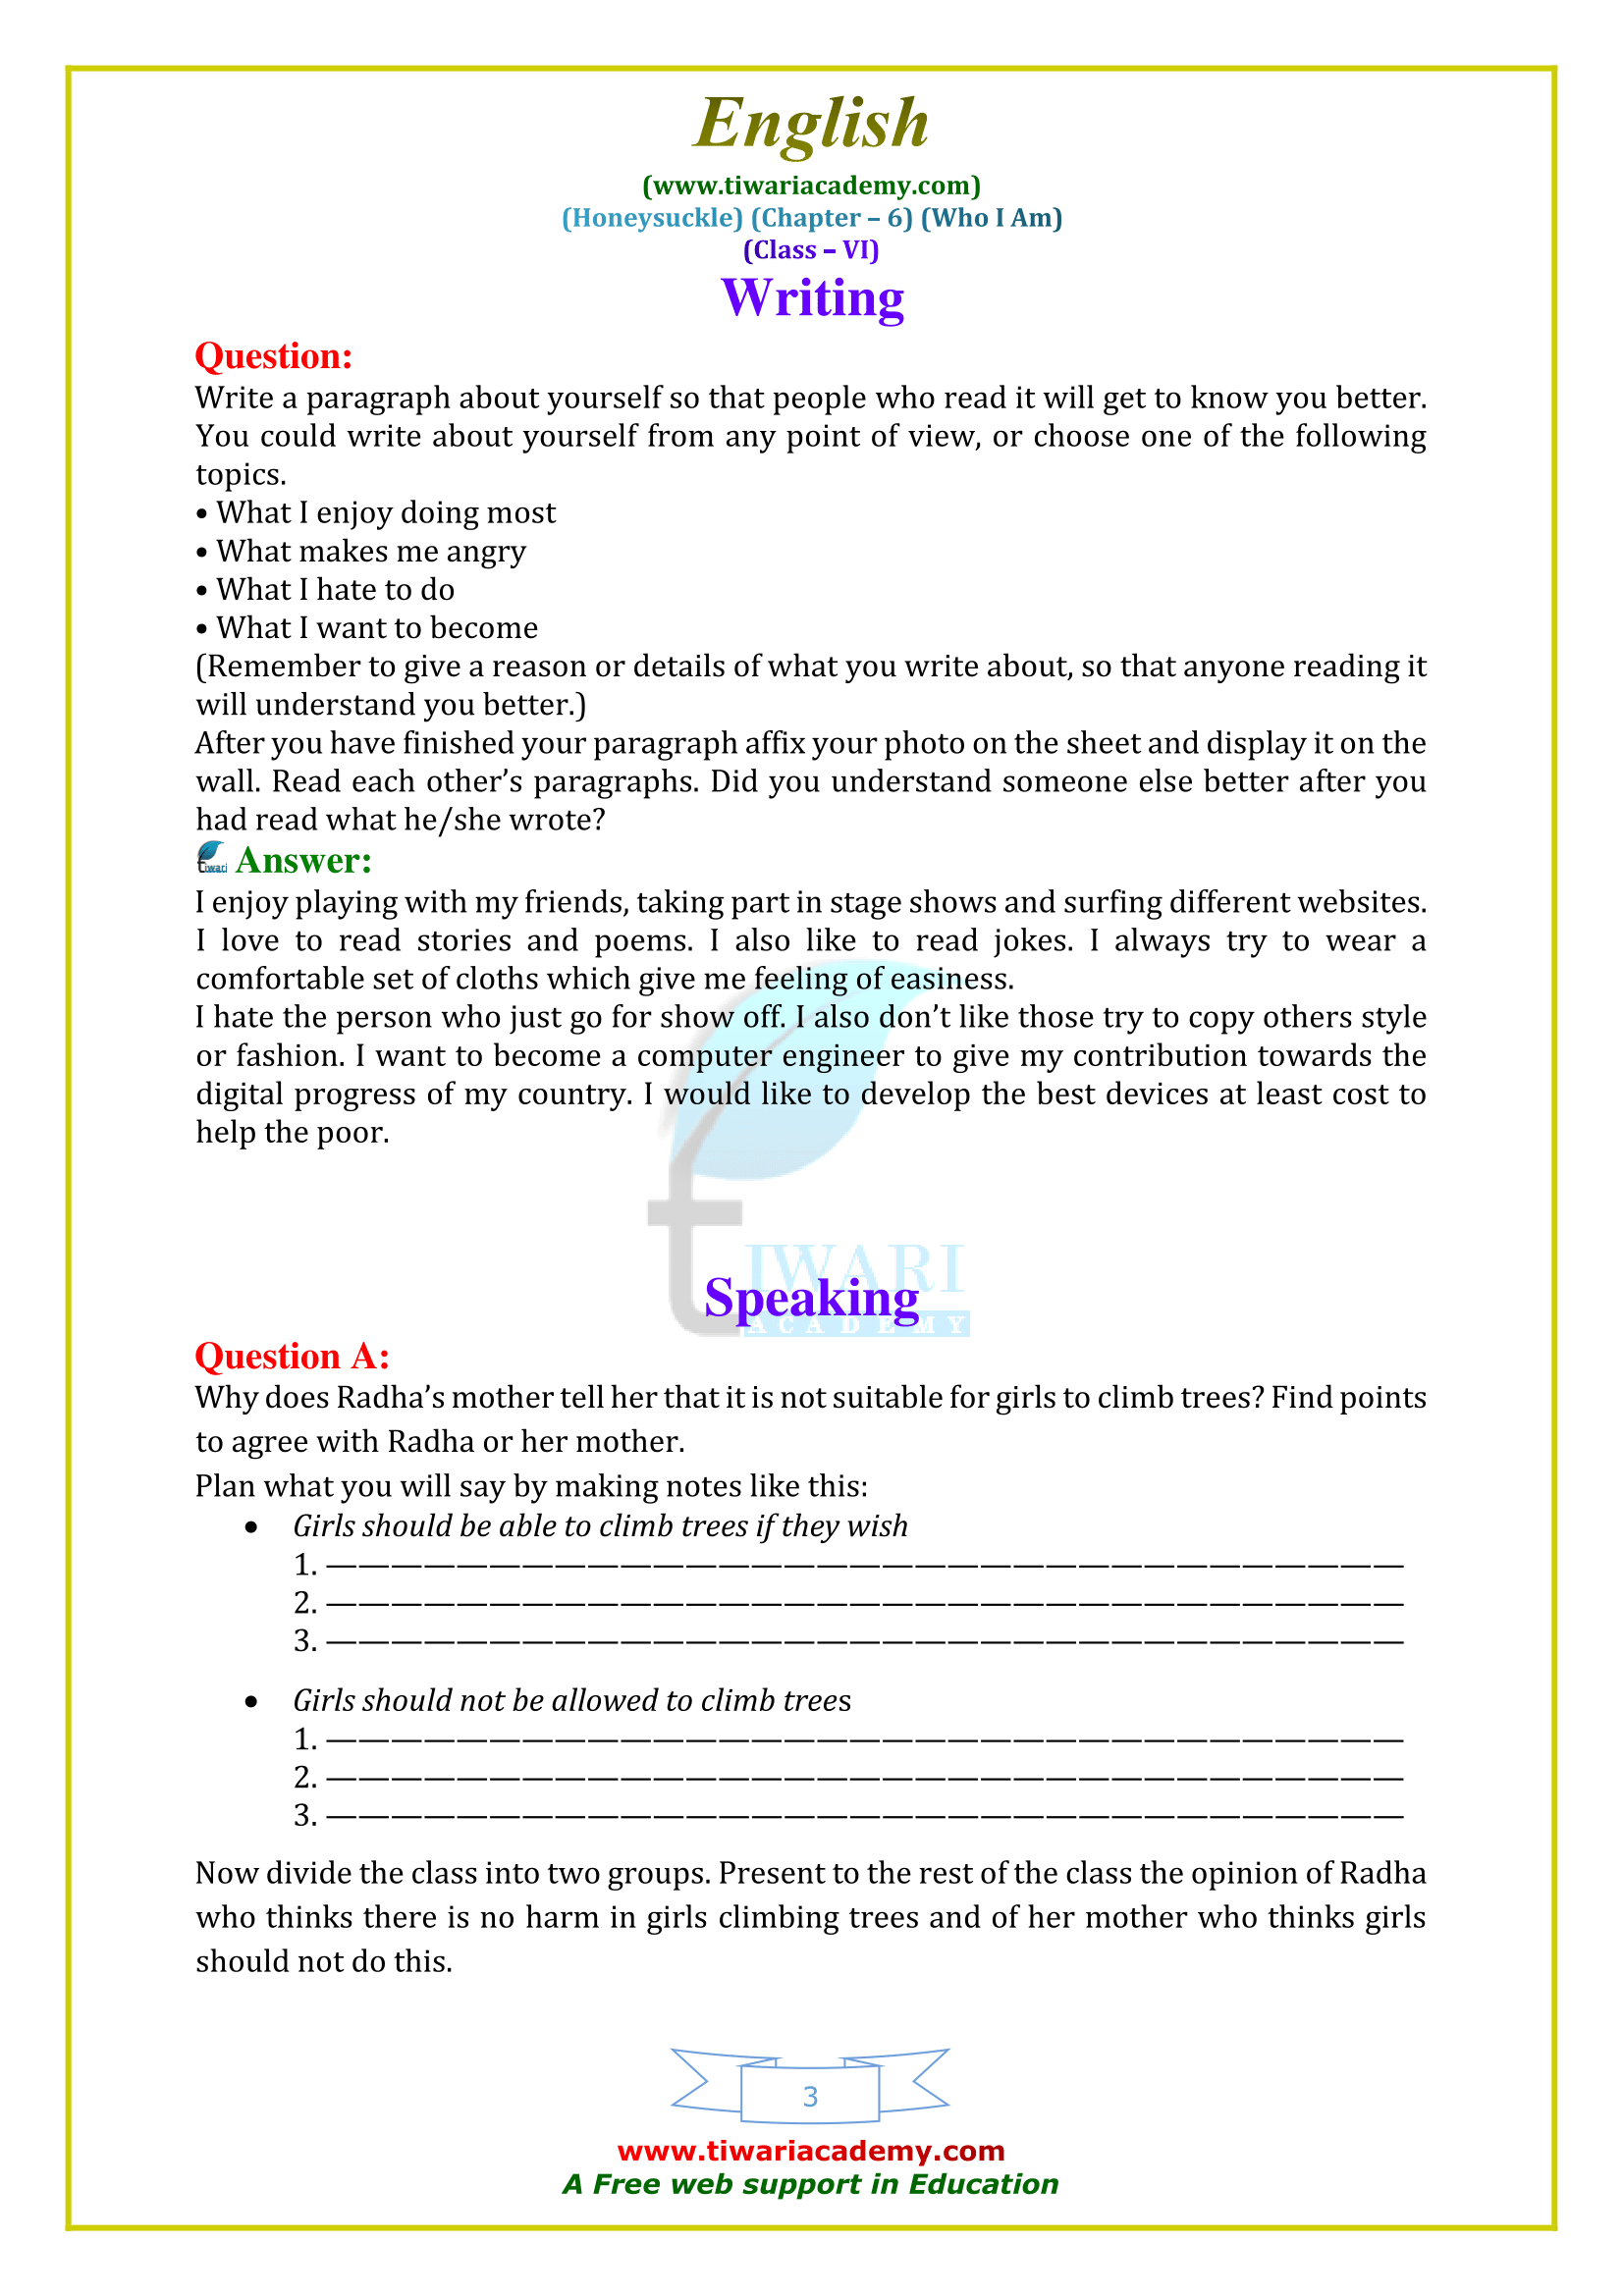 NCERT Solutions for Class 6 English Honeysuckle Chapter 6 for 2019-20.